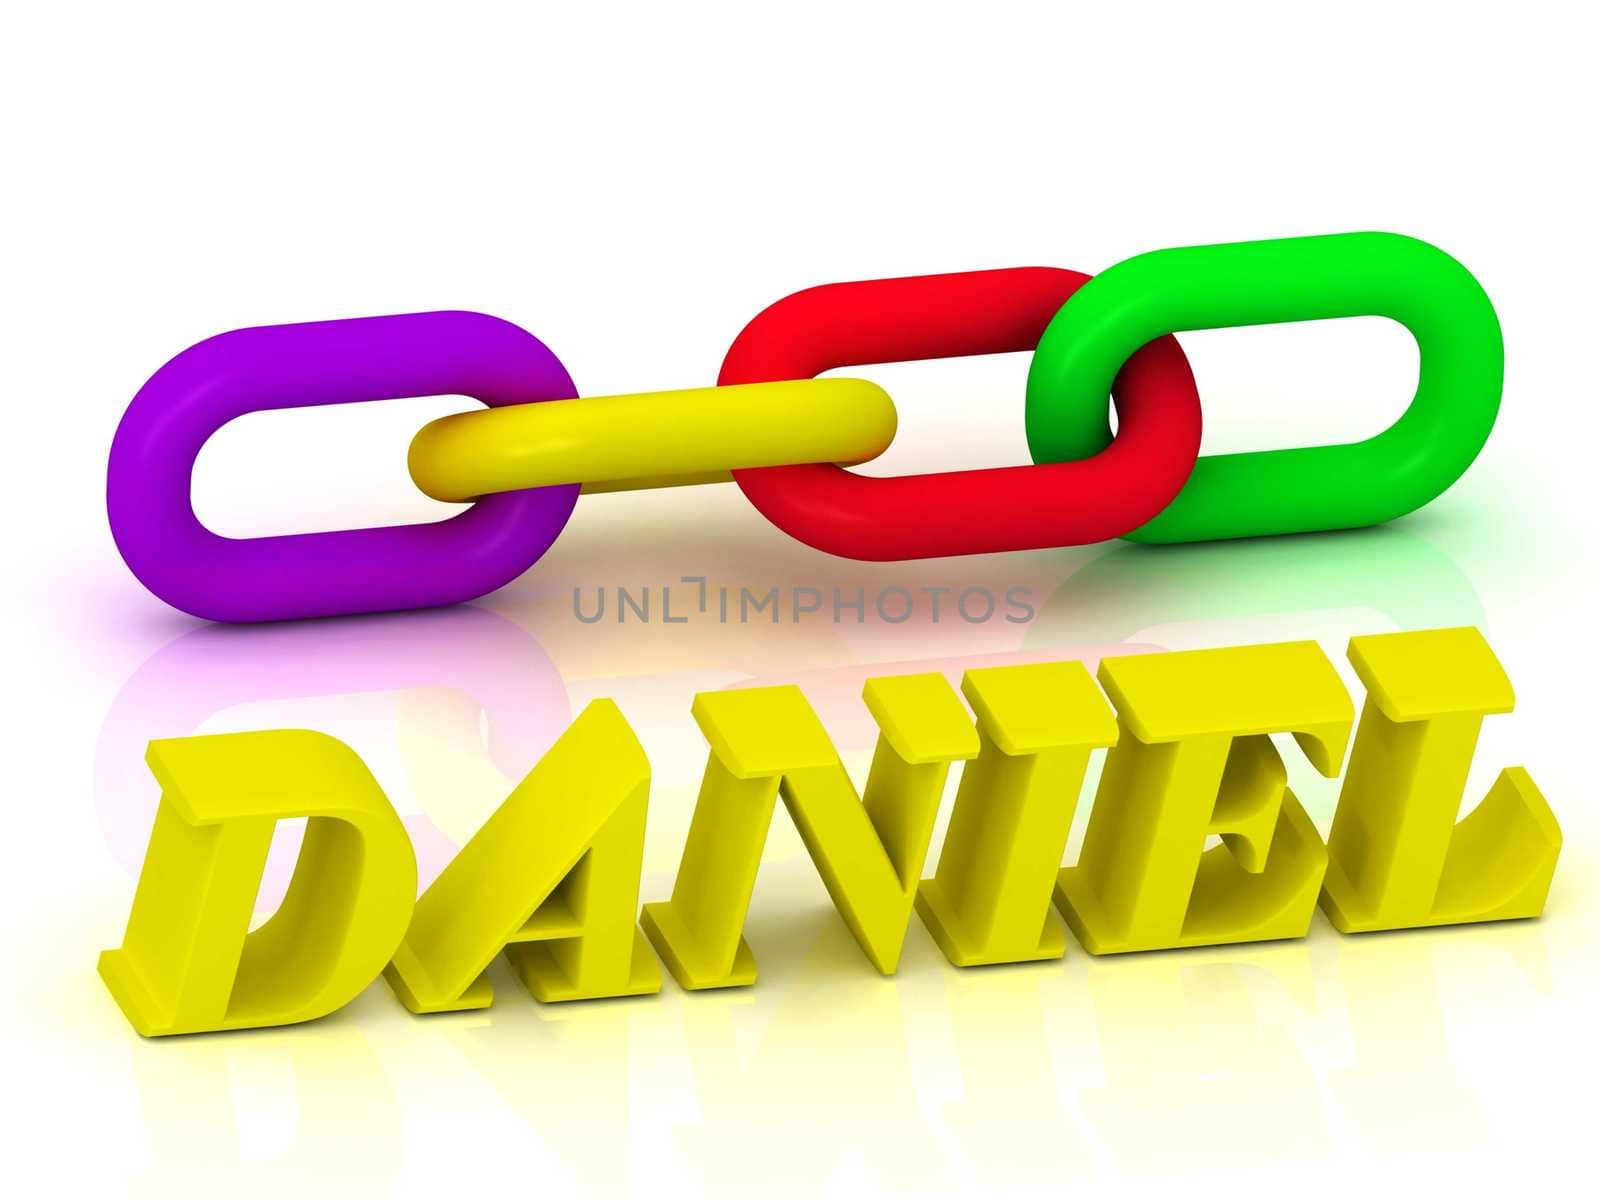 DANIEL- Name and Family of bright yellow letters and chain of green, yellow, red section on white background